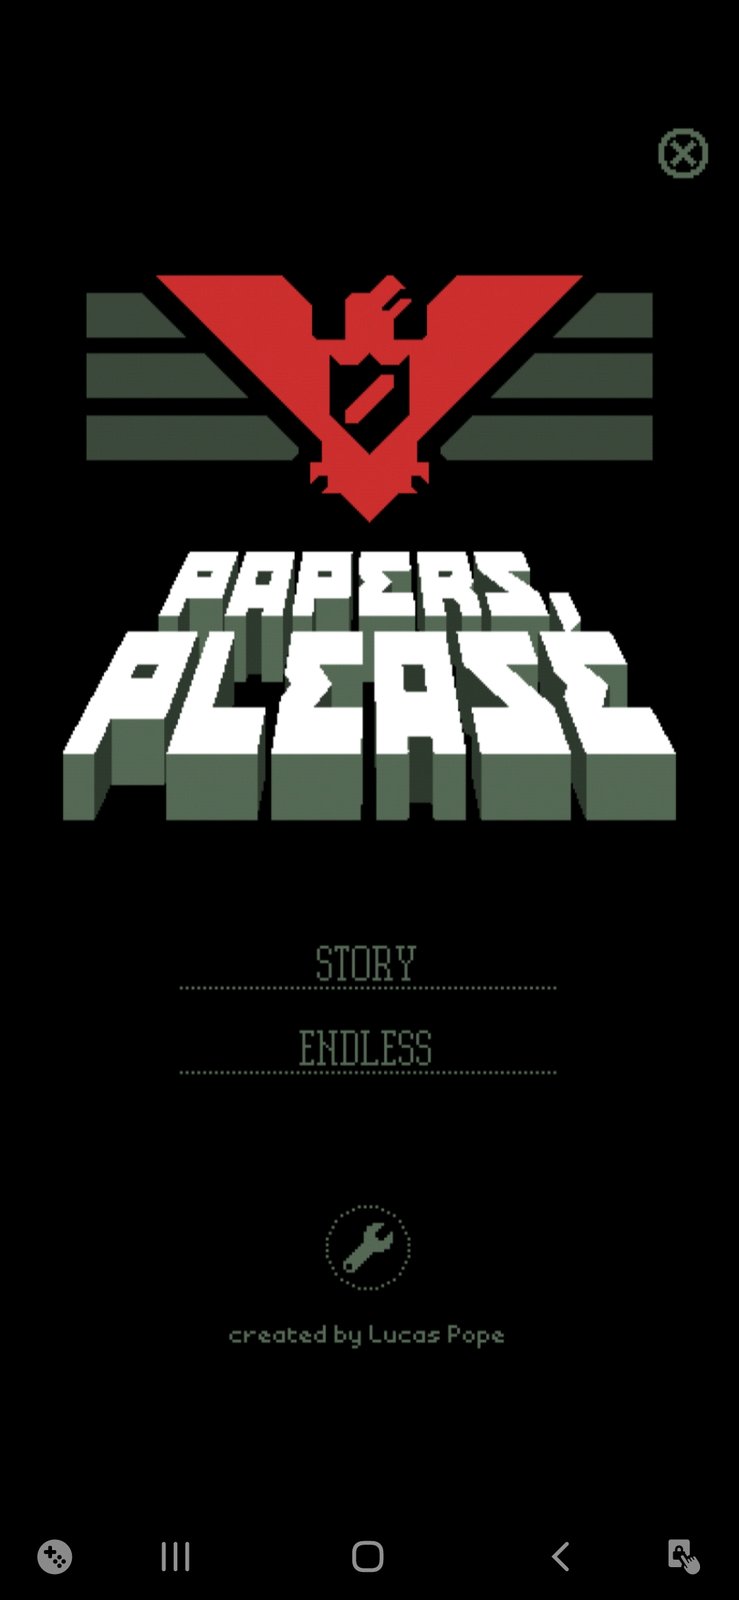 Papers, Please Mod Apk v1.4.4(Unlimited Resources/Free Download) Download